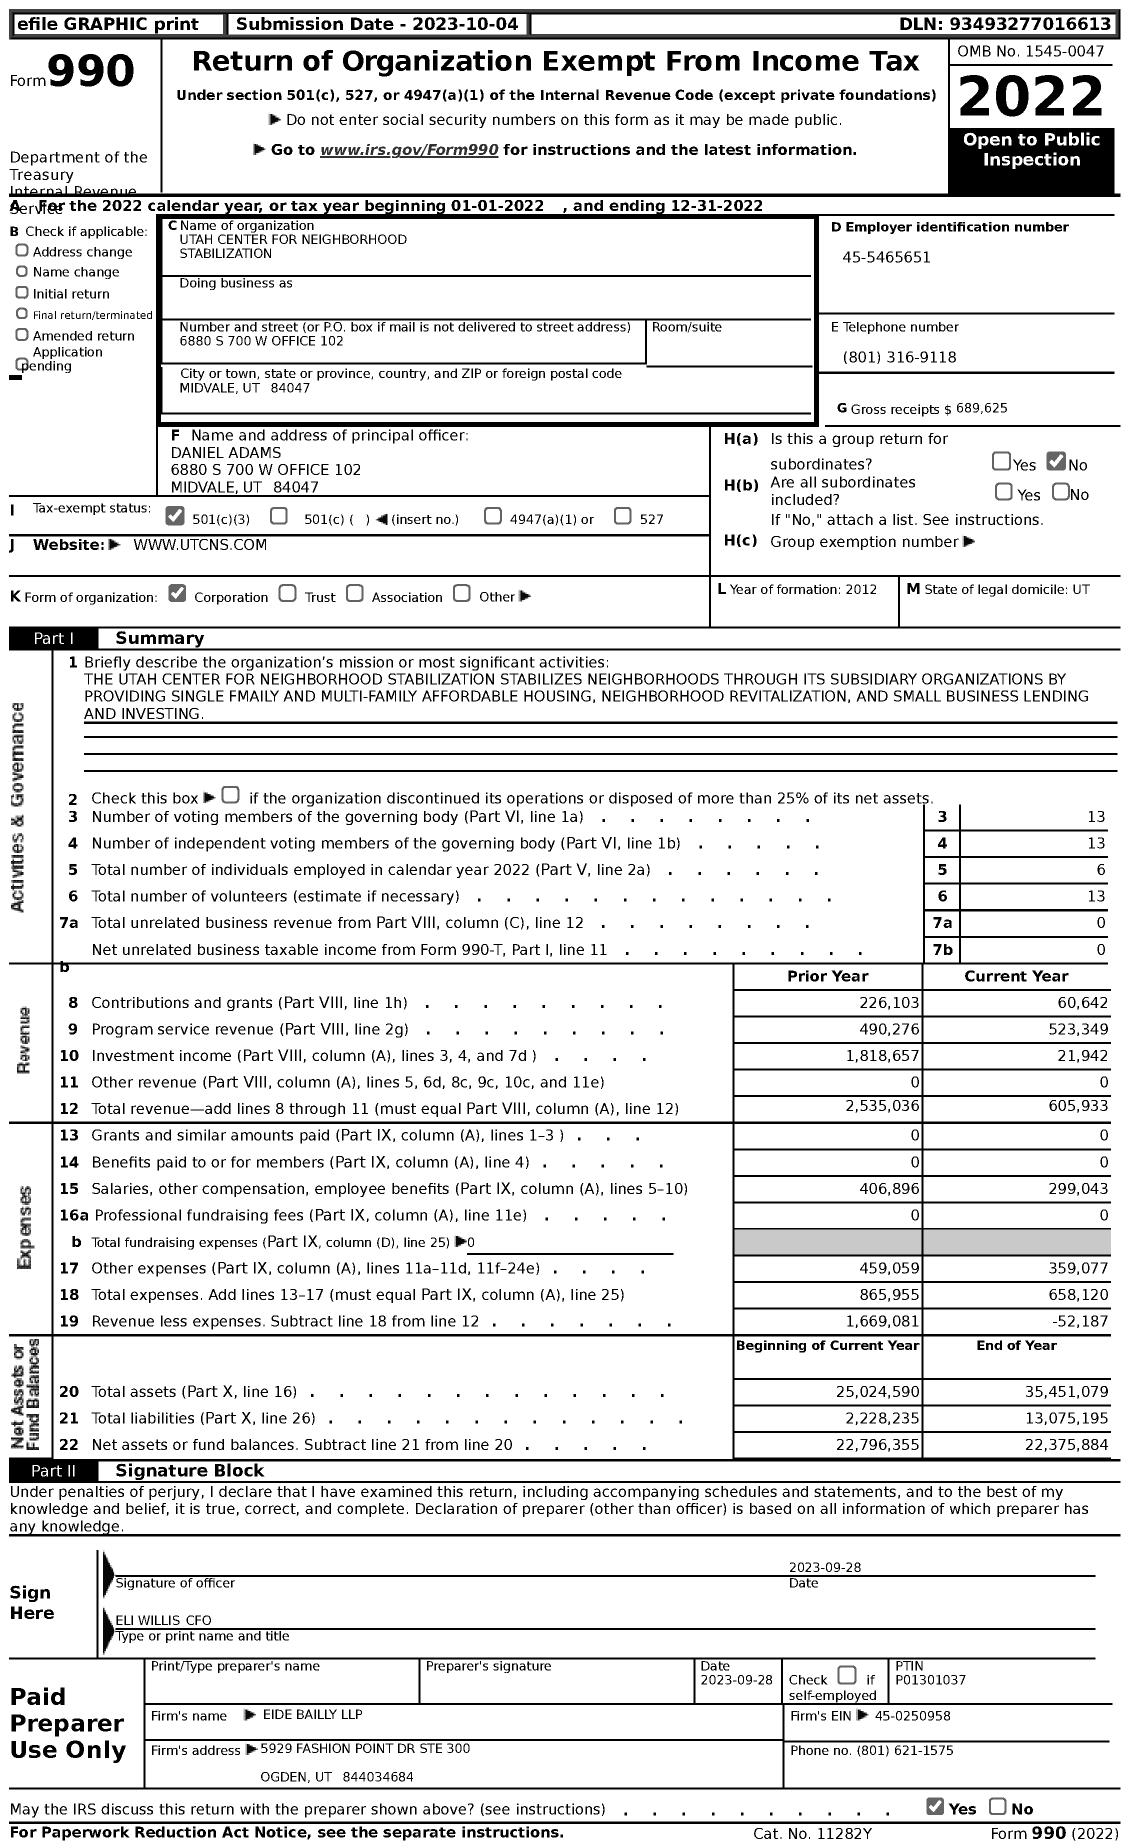 Image of first page of 2022 Form 990 for Utah Center for Neighborhood Stabilization